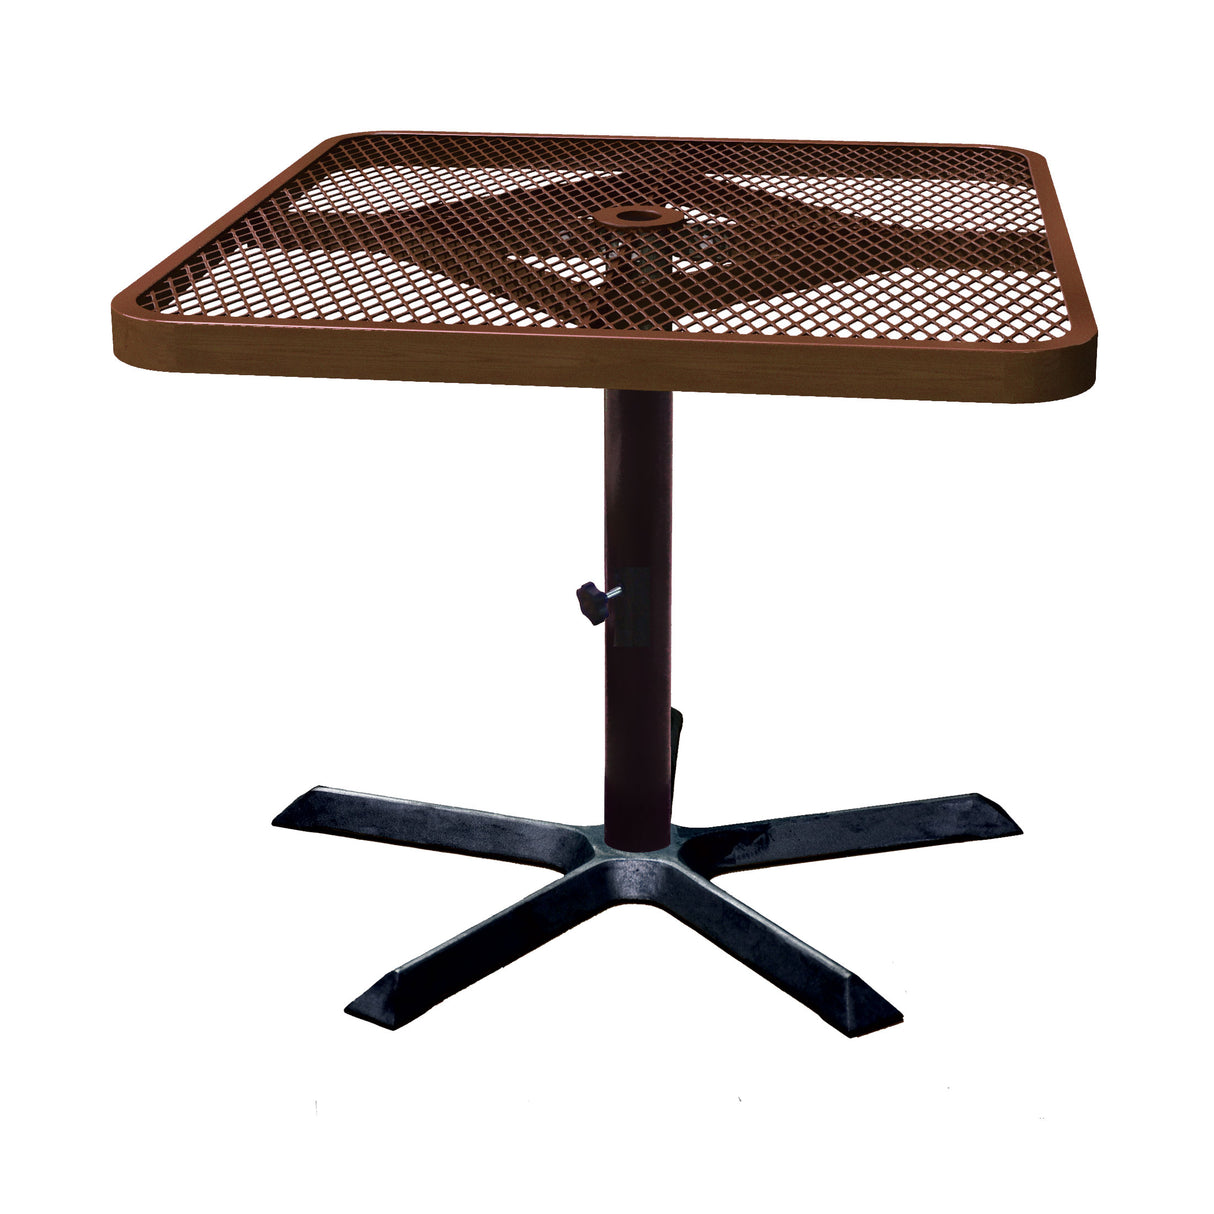 brown square expanded pedestal table with 5-point base